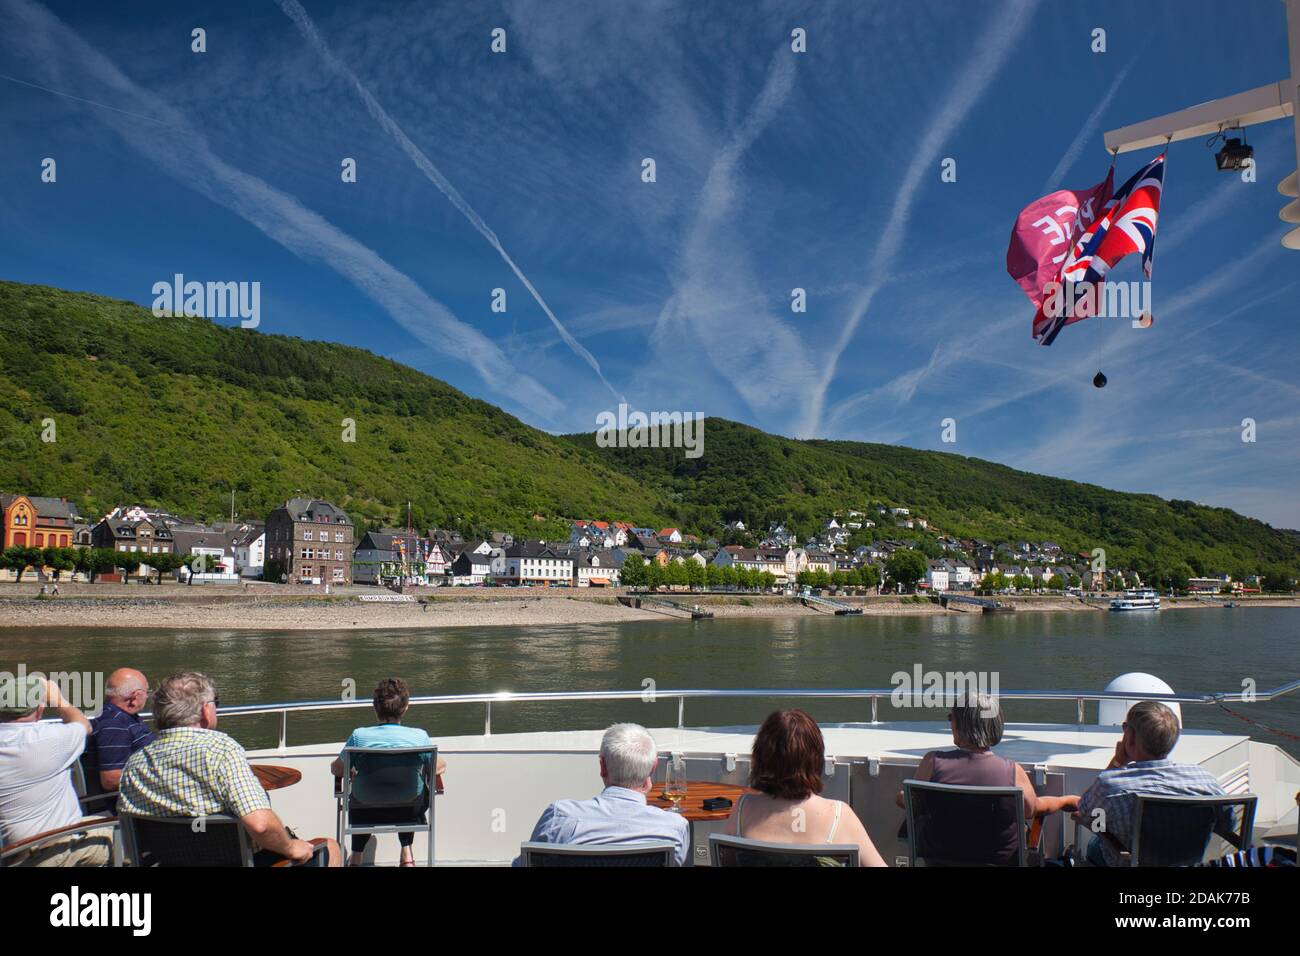 Passengers on a cruise boat on the River Rhine look at the view ahead with many jet vapour trails in the blue sky above. The River Rhine, Germany Stock Photo